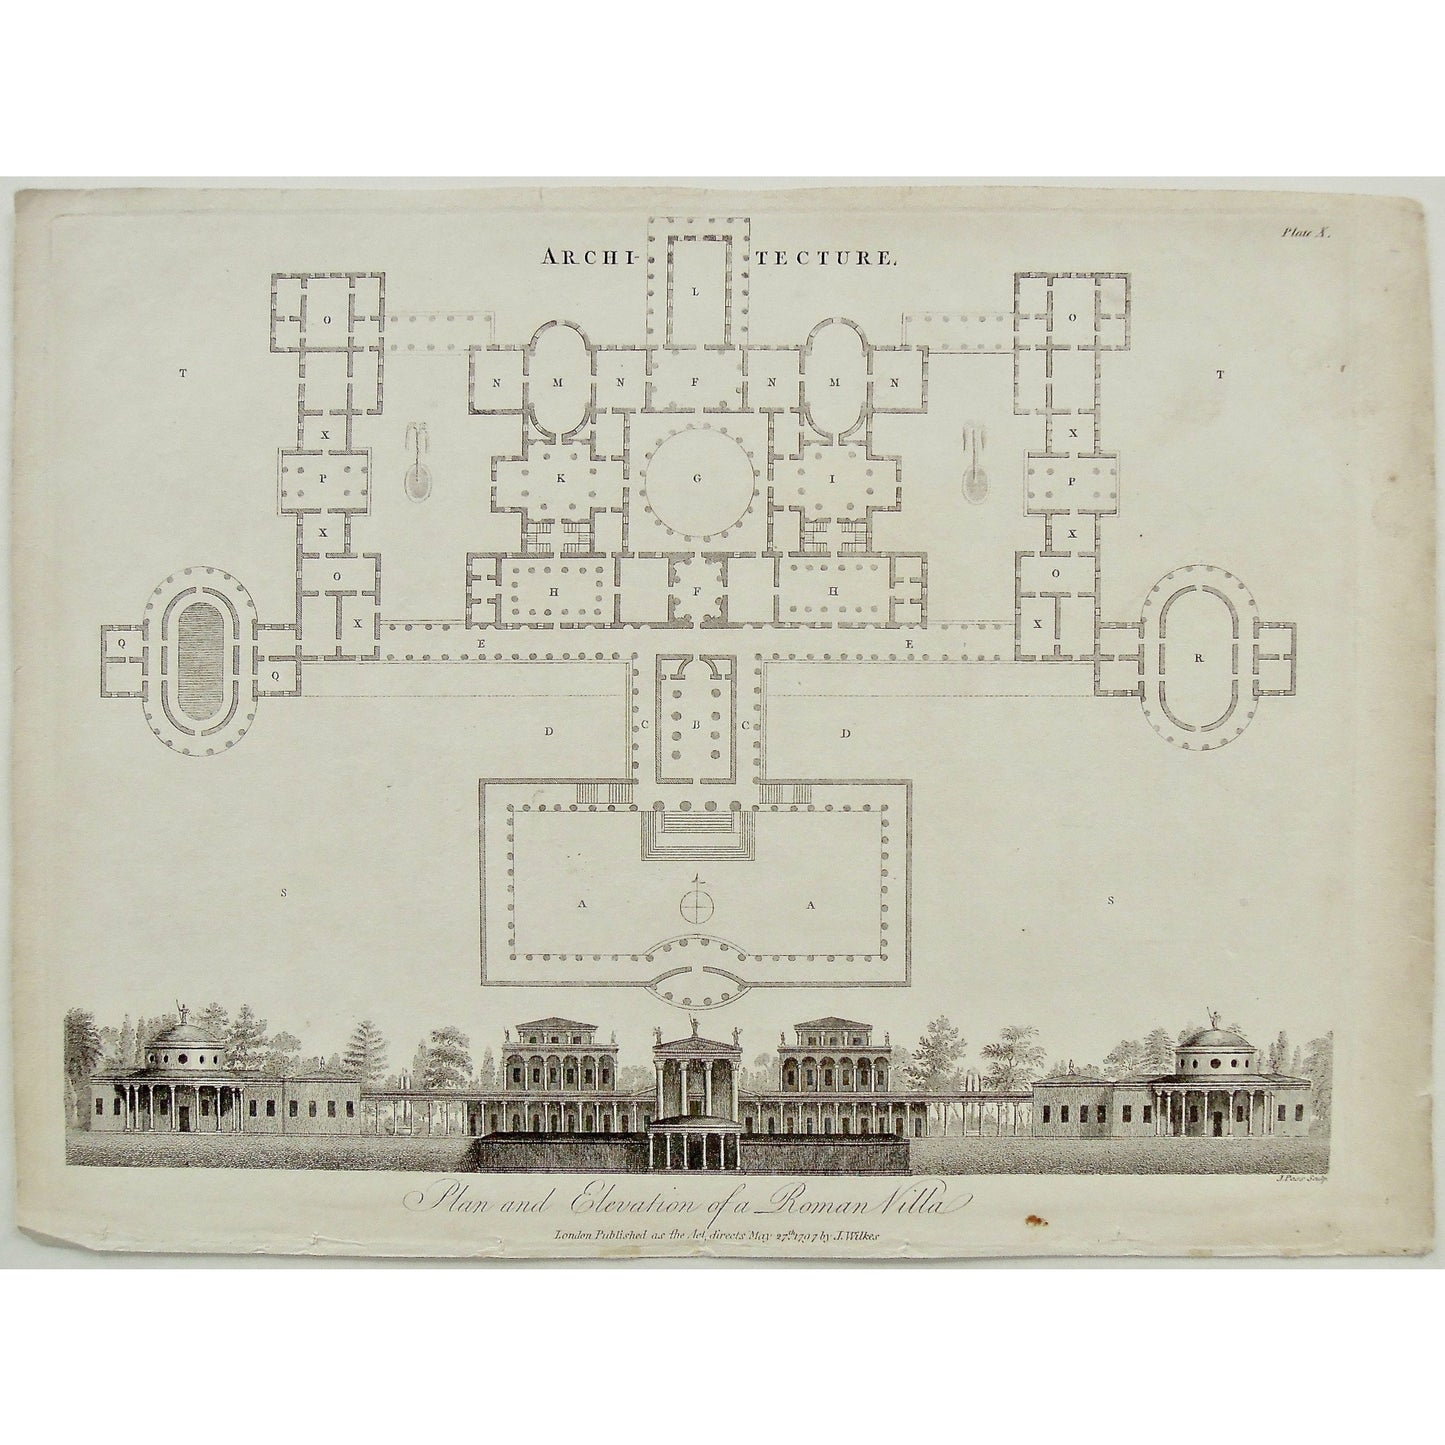 Architecture. Plan and Elevation of a Roman Villa.  (B1-100)